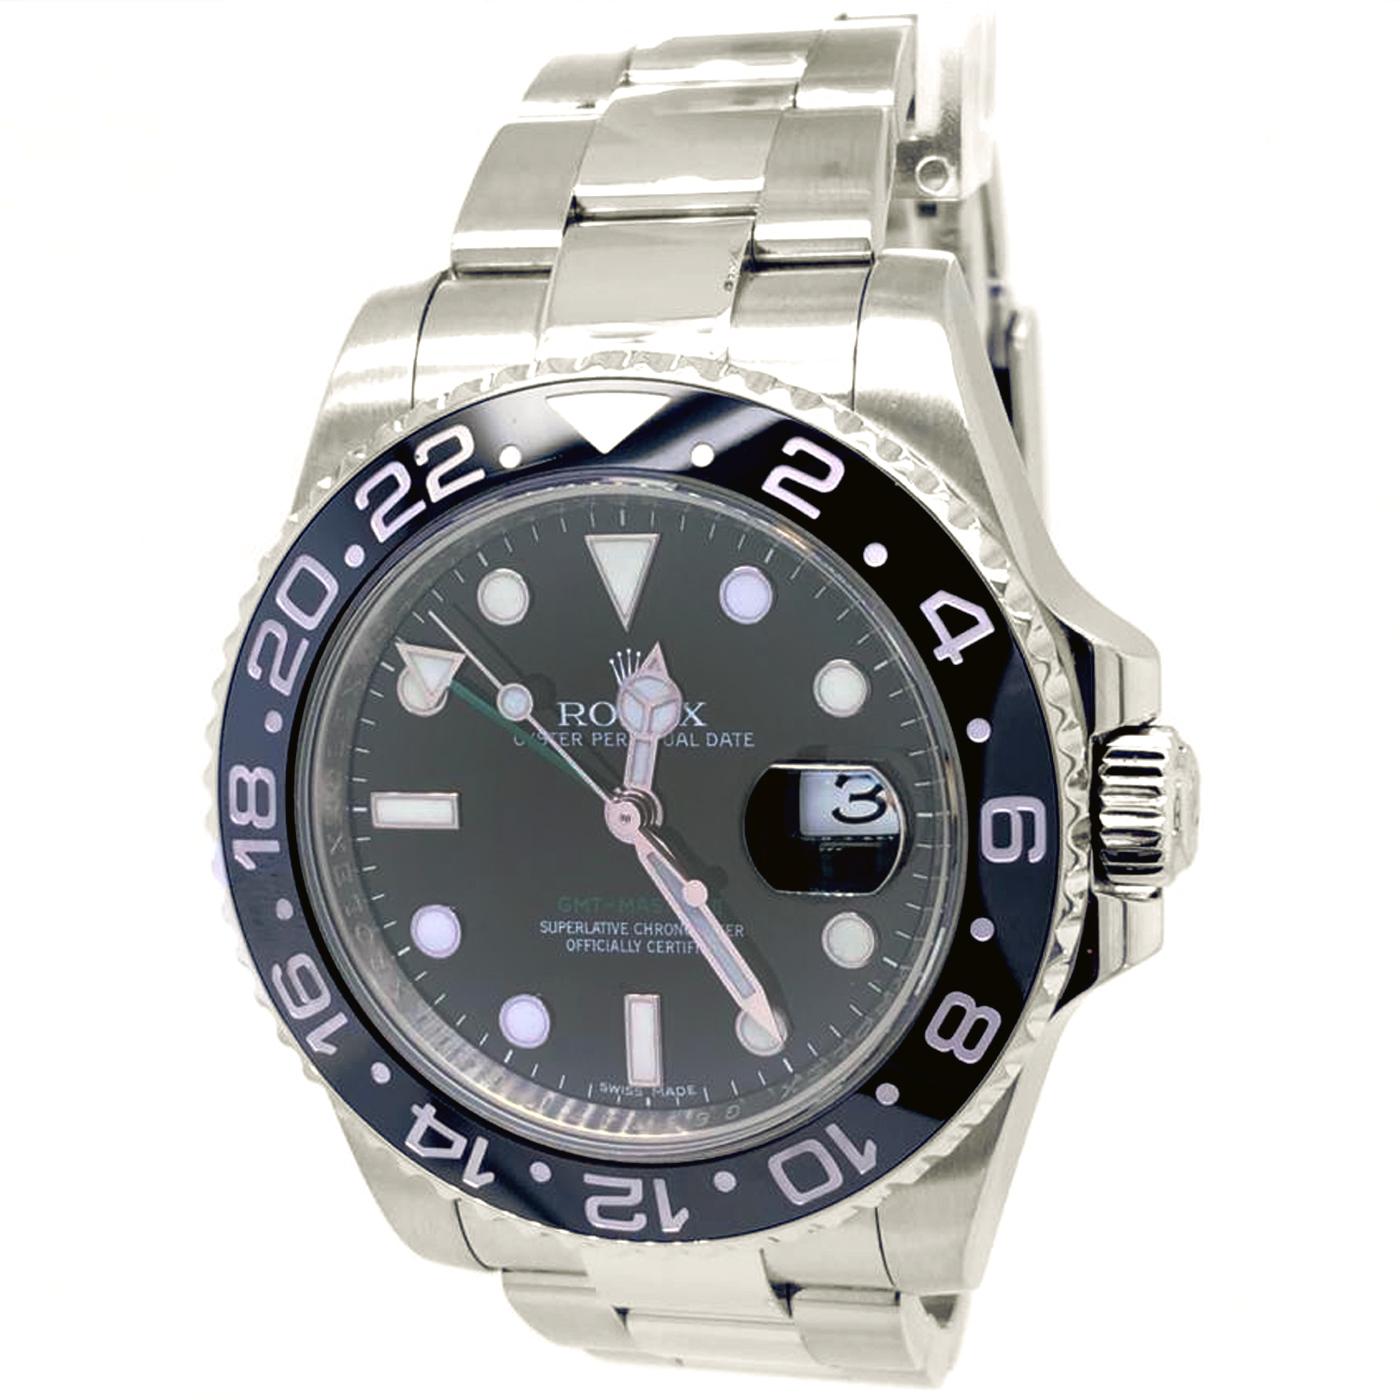 Rolex GMT Master II 116710, 116710LN, stainless steel on a stainless steel bracelet, automatic Rolex caliber 3186 movements, date, second-time zone, 24-hour hand, COSC, black dial, black bi-directional ceramic bezel, sapphire crystal,